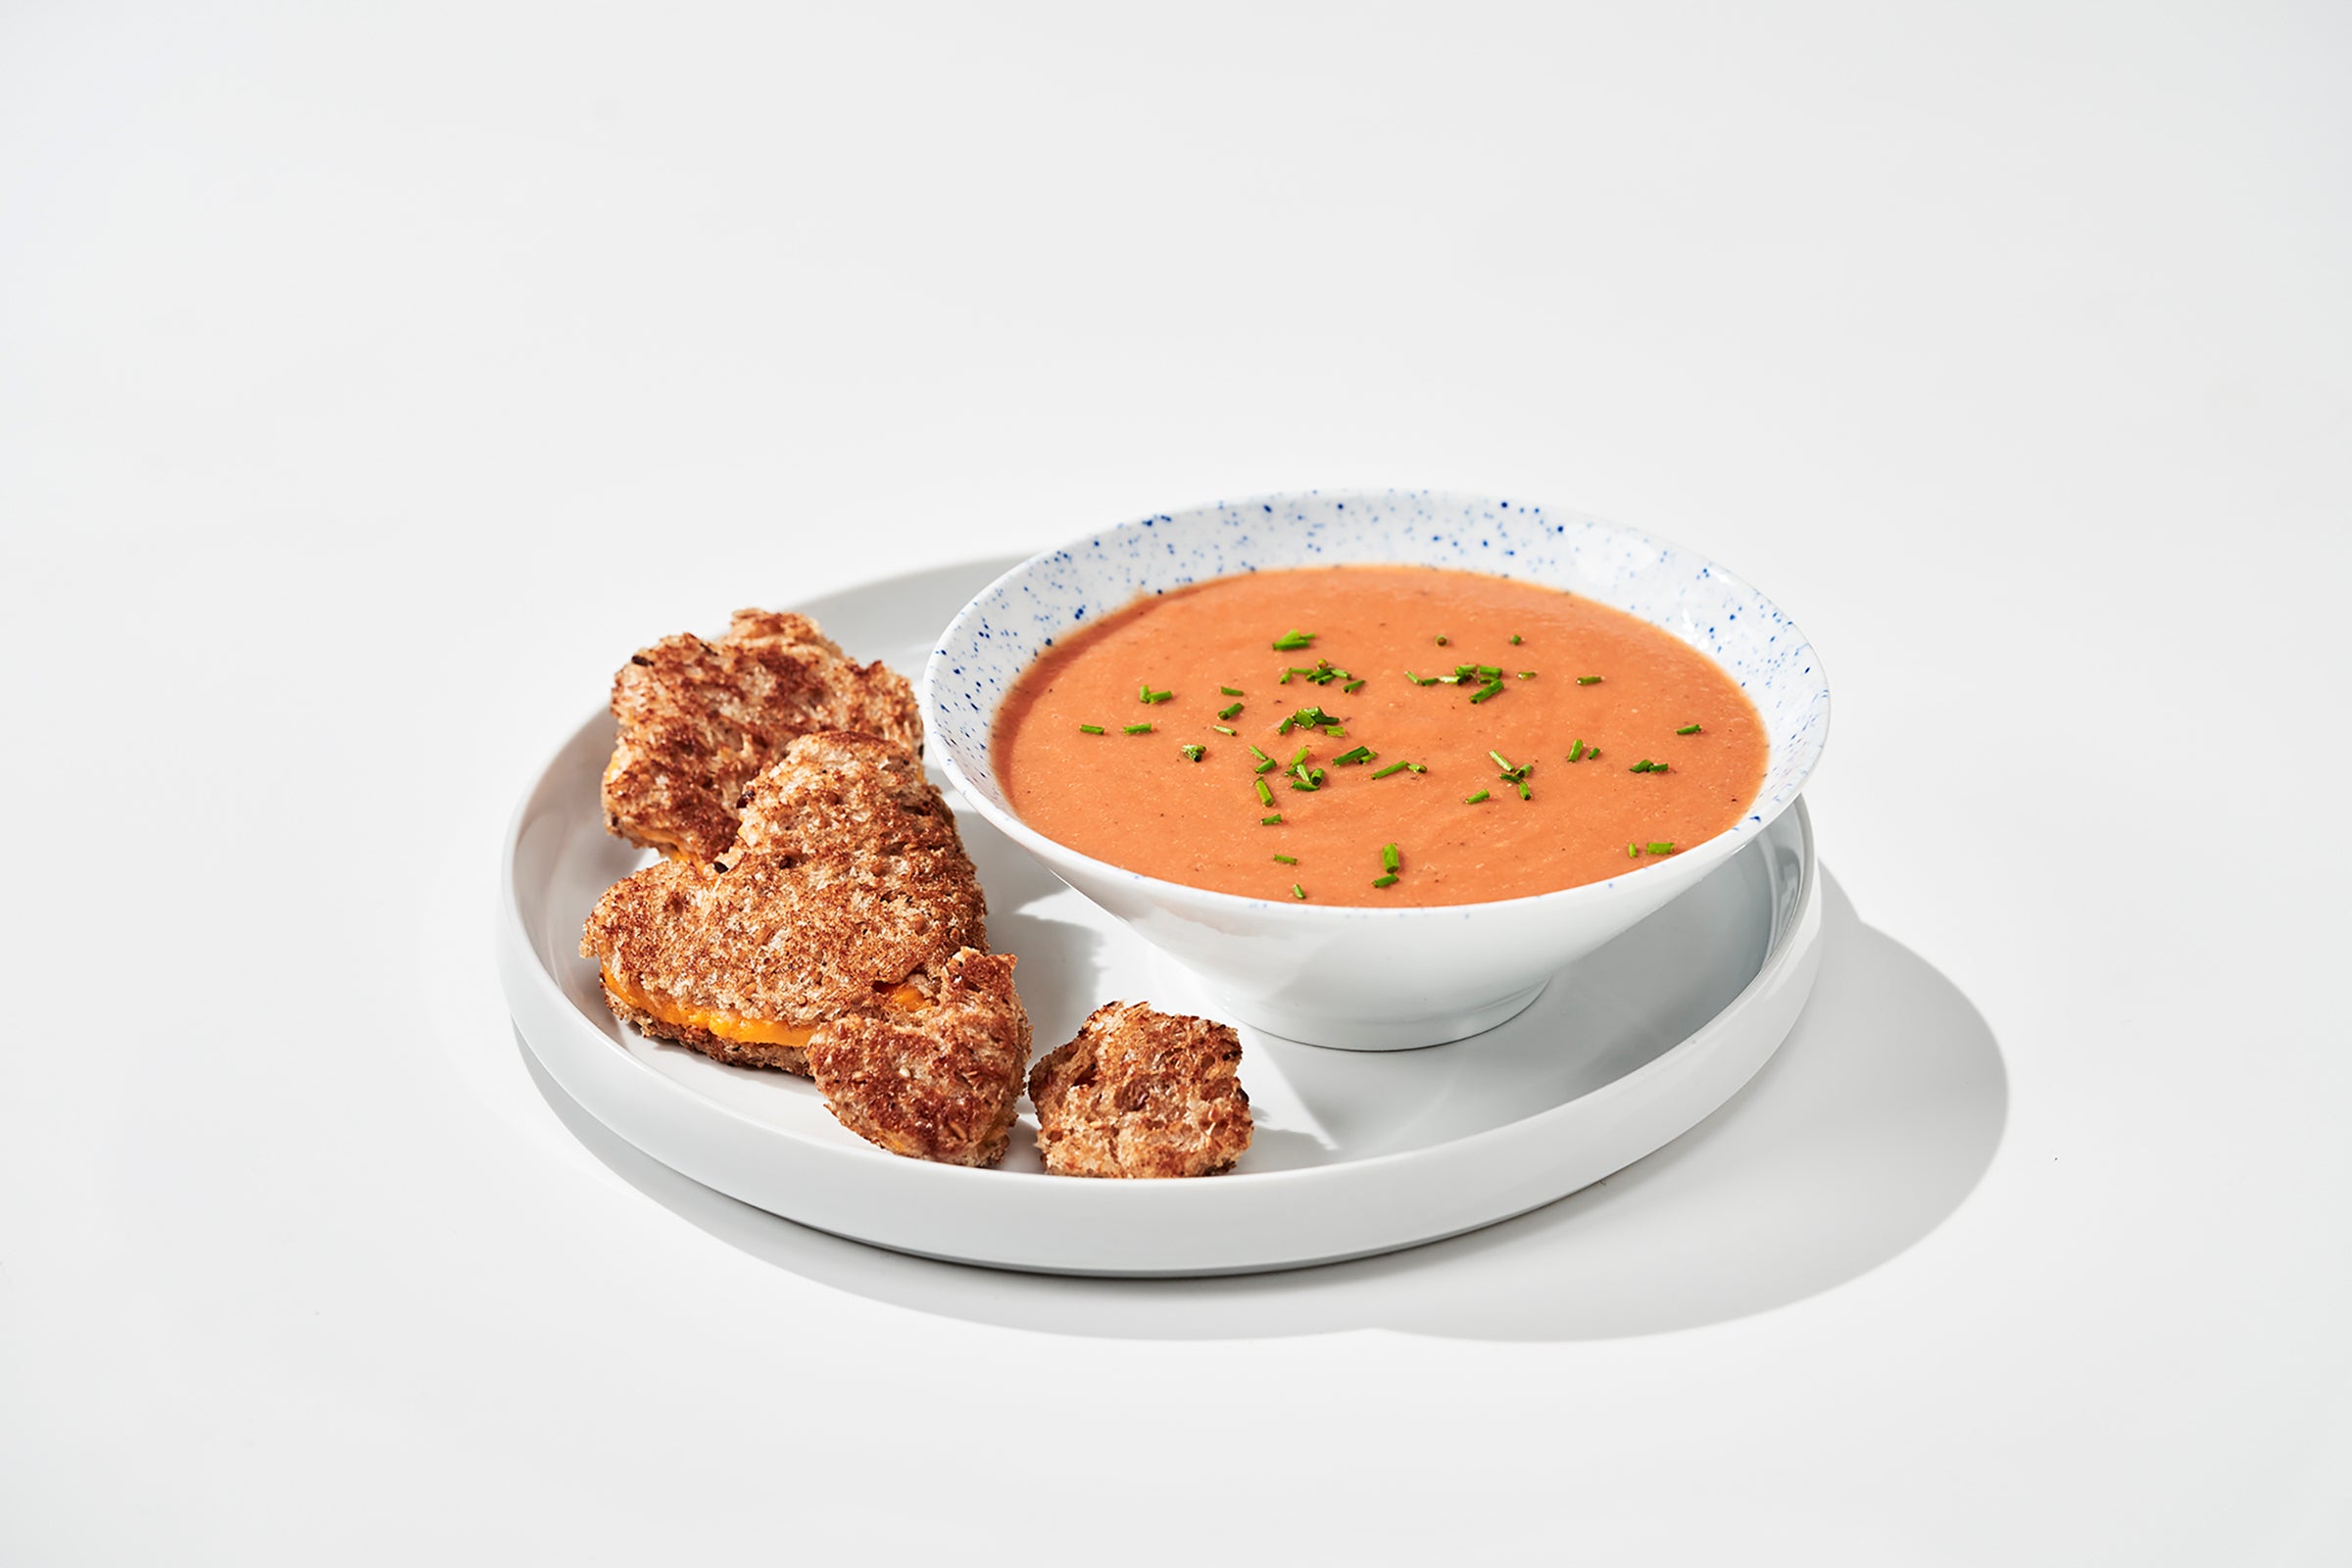 Vegan tomato soup and grilled cheese sandwich